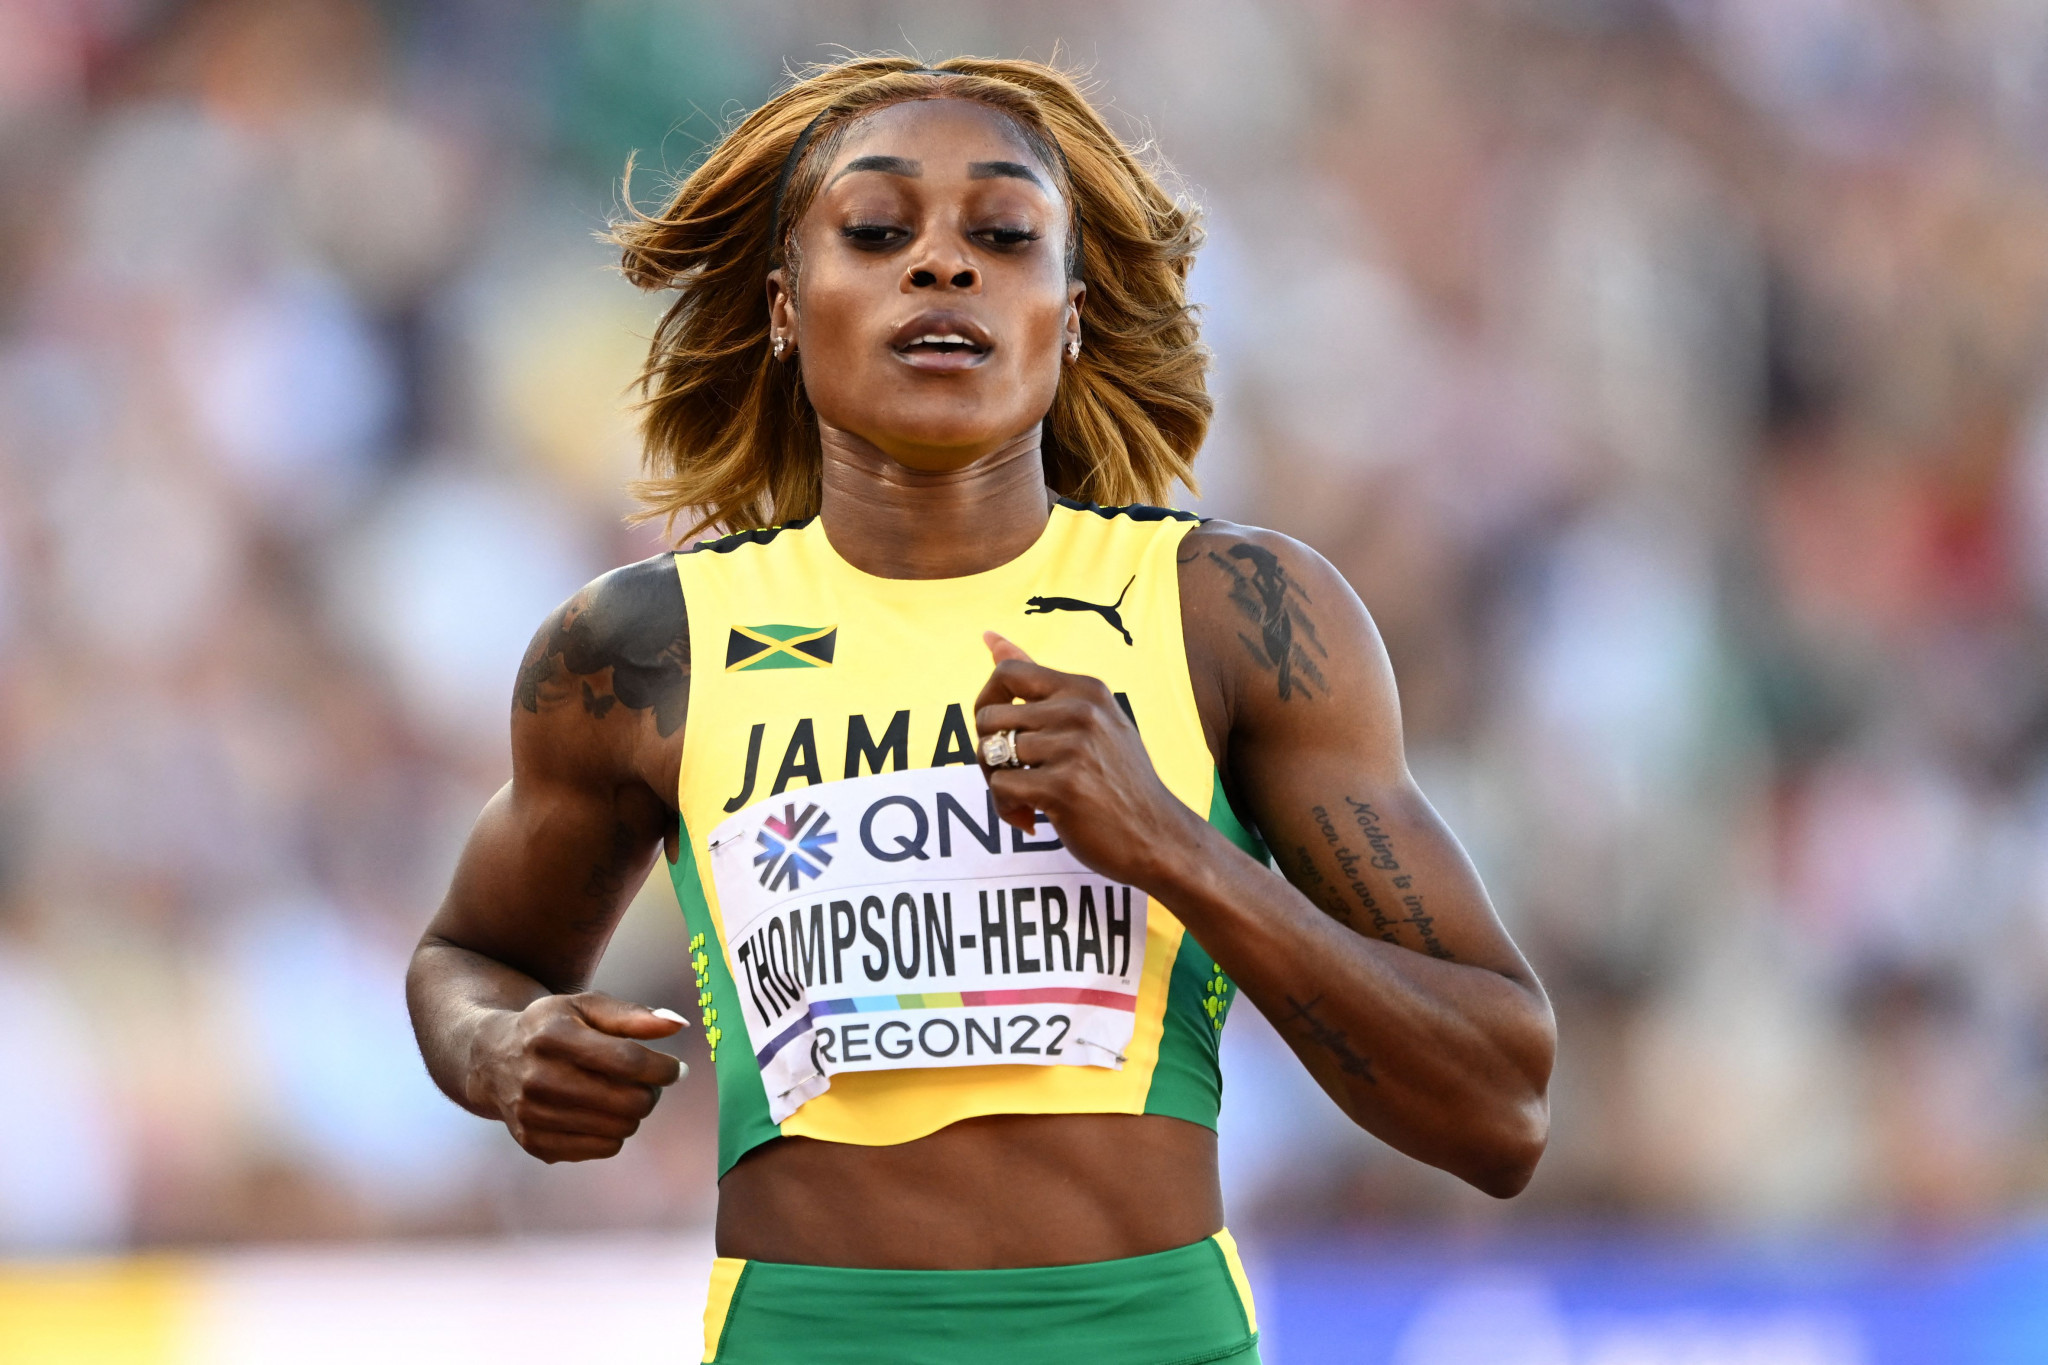 Elaine Thompson-Herah is currently on the Birmingham 2022 start-list ©Getty Images